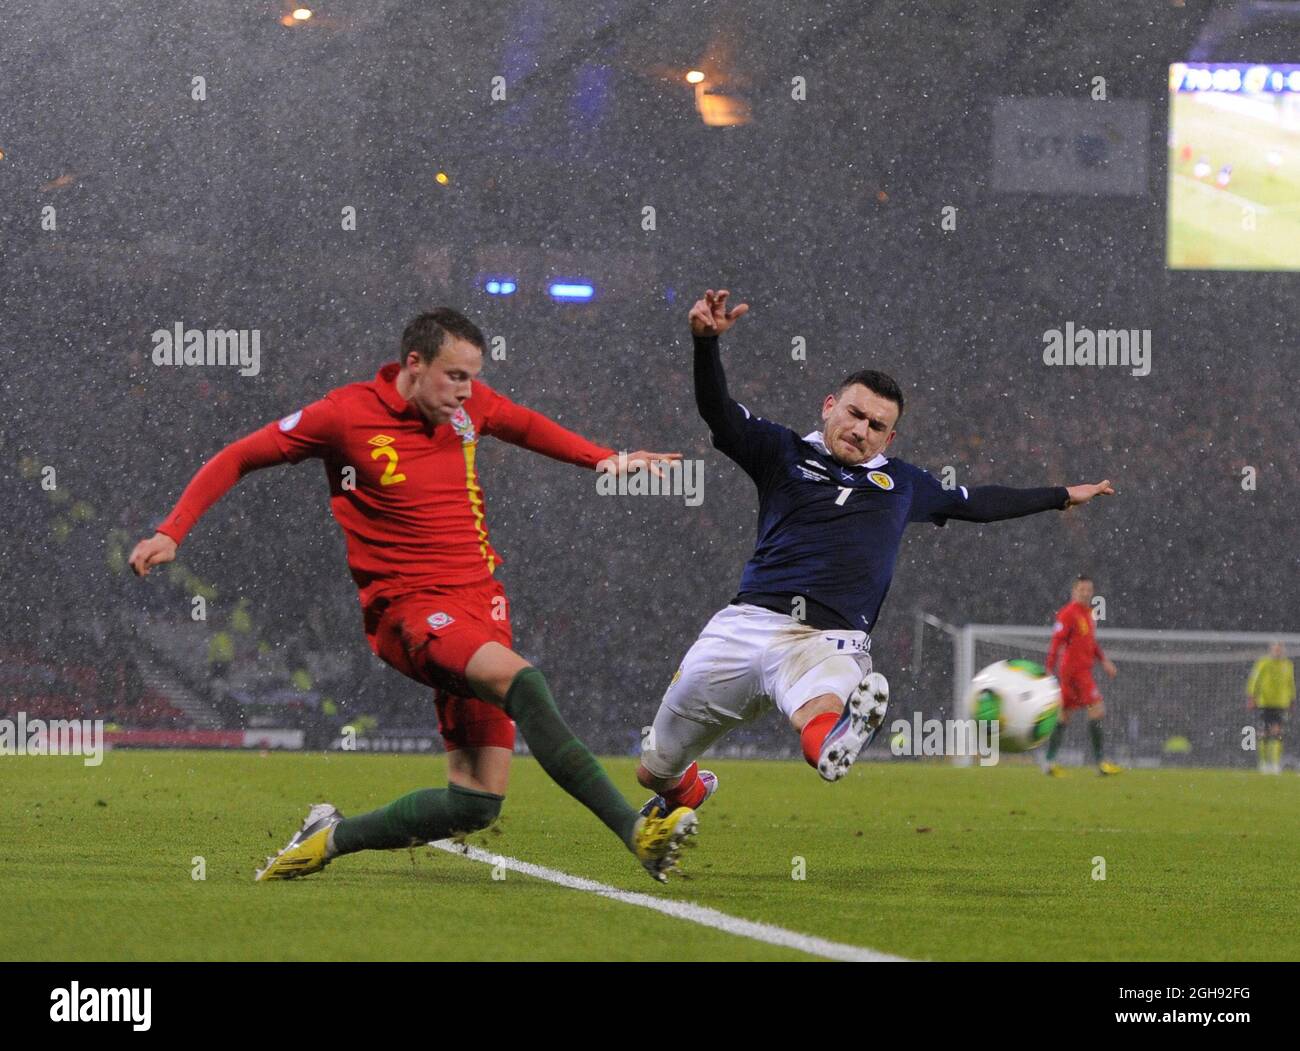 Robert Snodgrass of Scotland launches himself into Chris Gunter of Wales which led to the red card for Snodgrass during the FIFA 2014 World Cup Group A qualifying match between Scotland and Wales at Hampden Park in Glasgow, Scotland on on March 22, 2013. Stock Photo